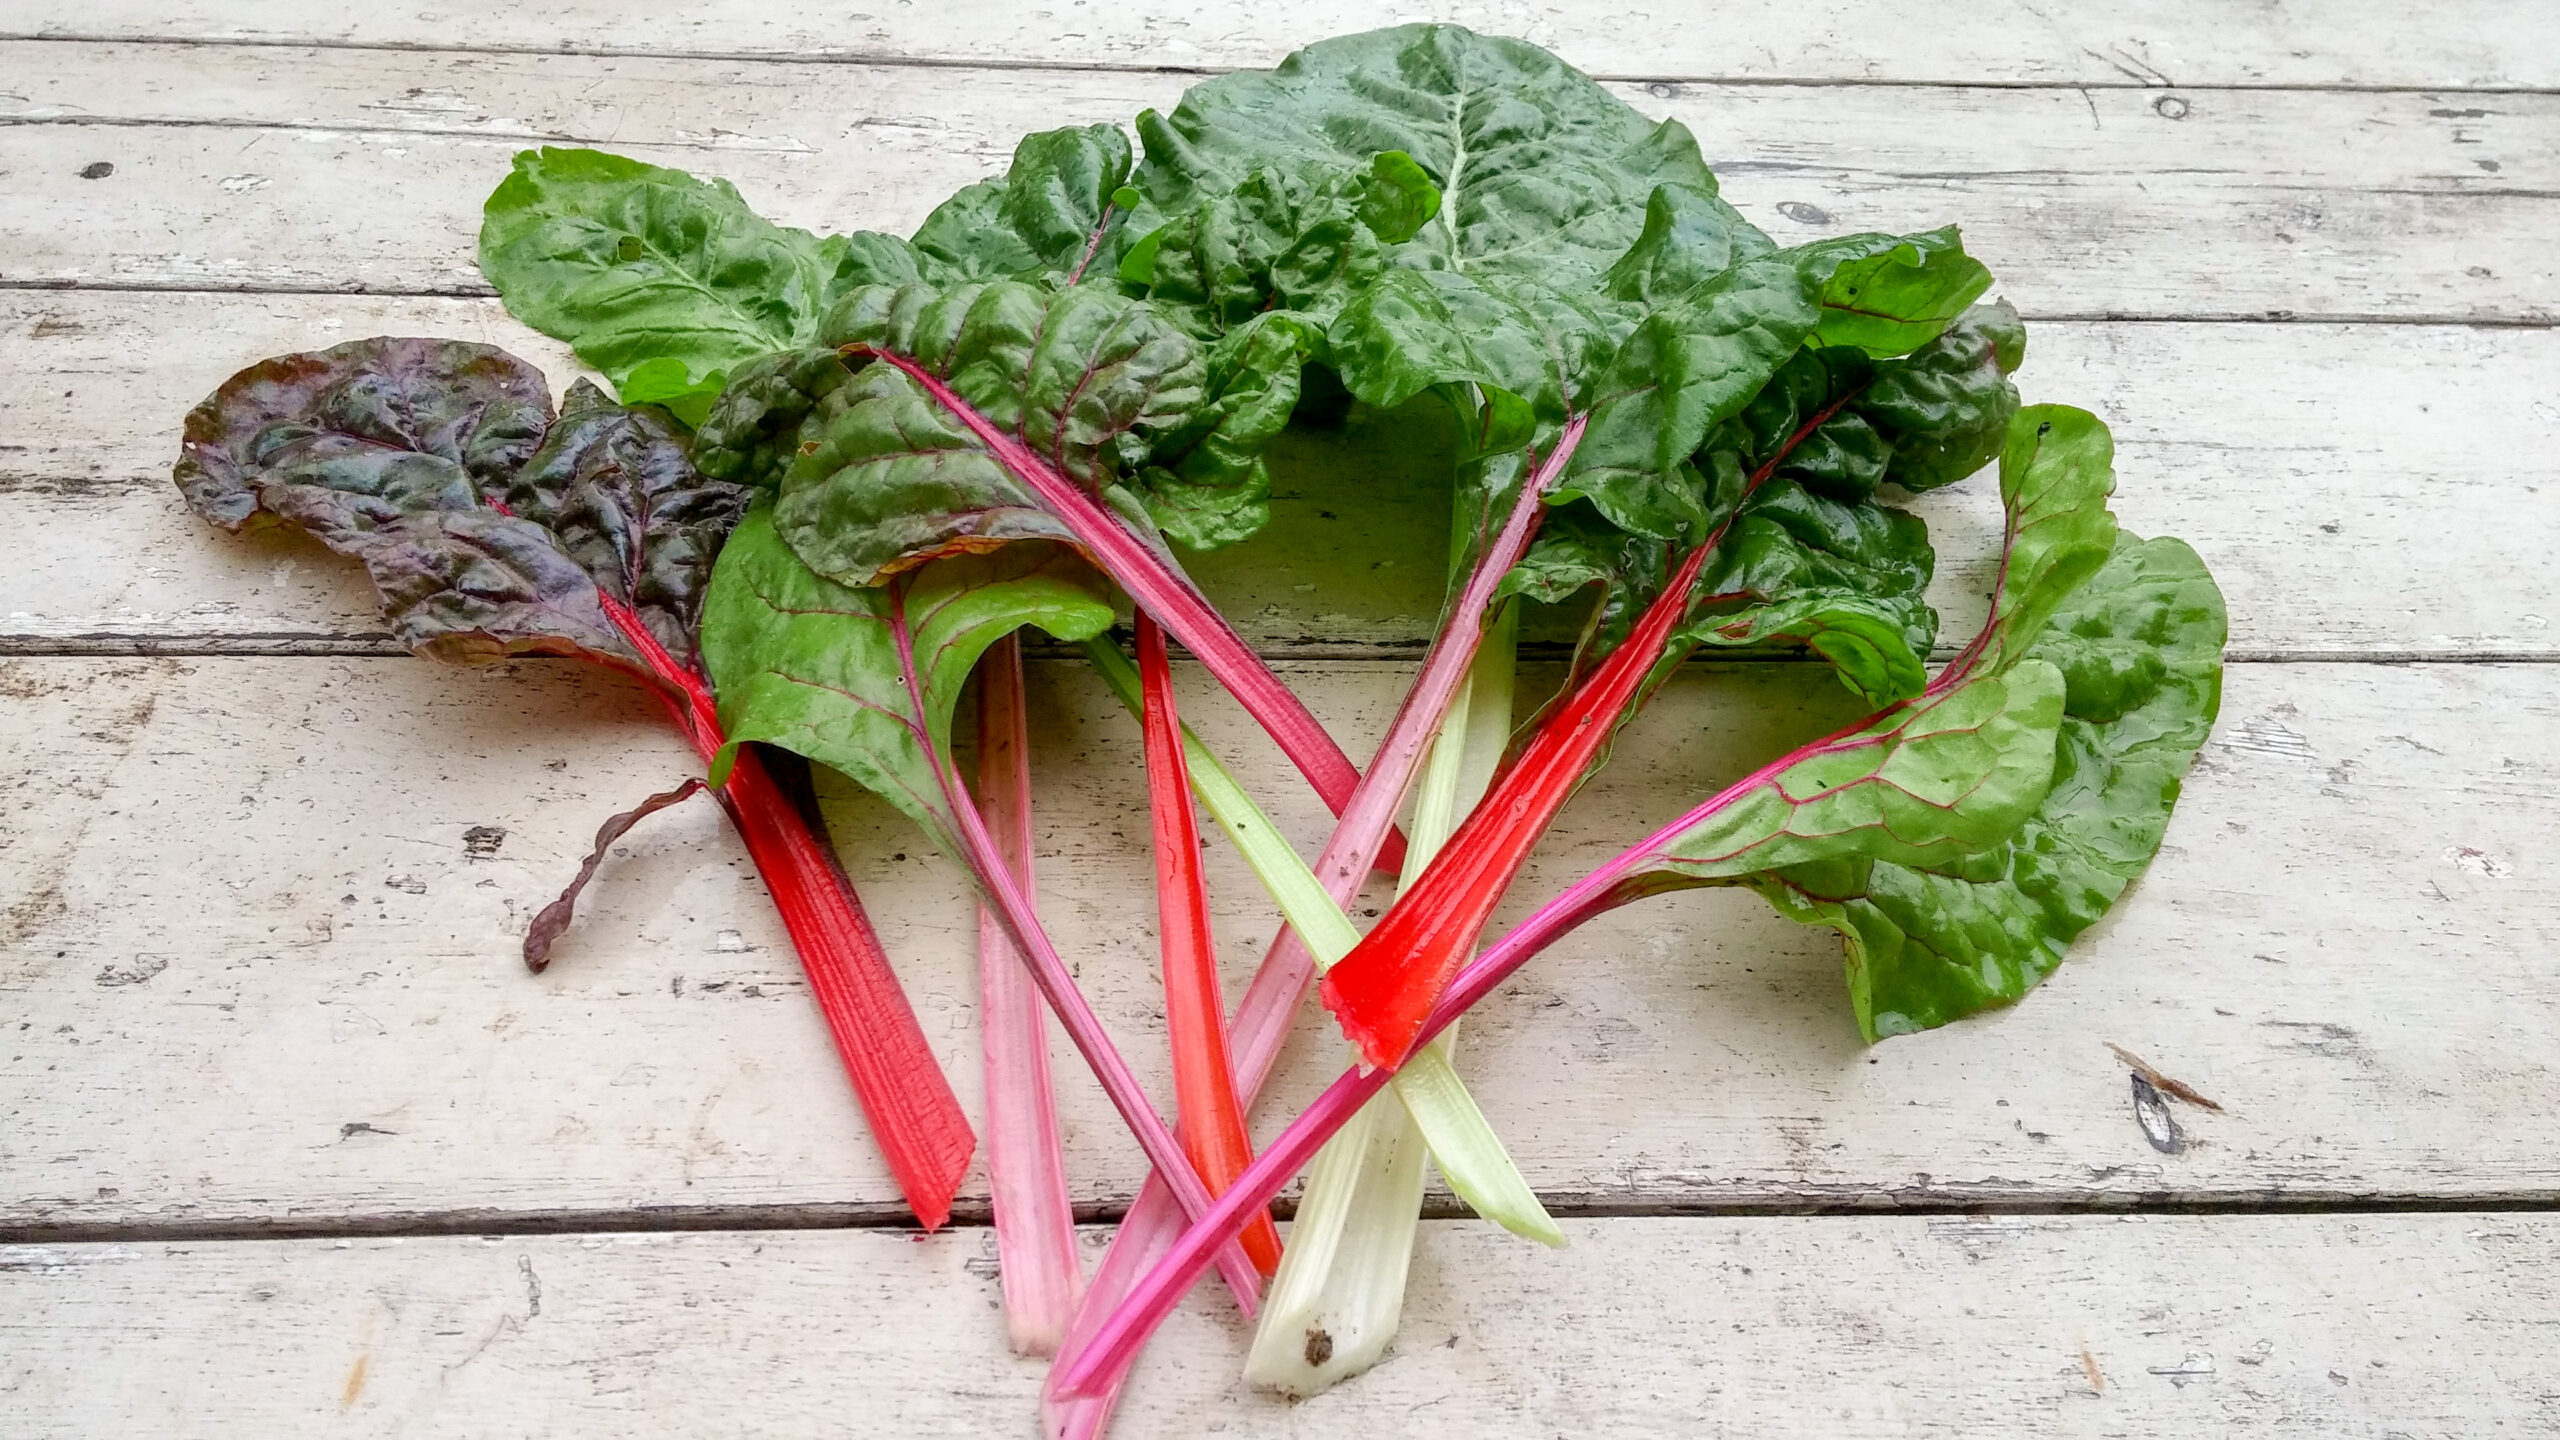 Heirloom Chard in various shades.